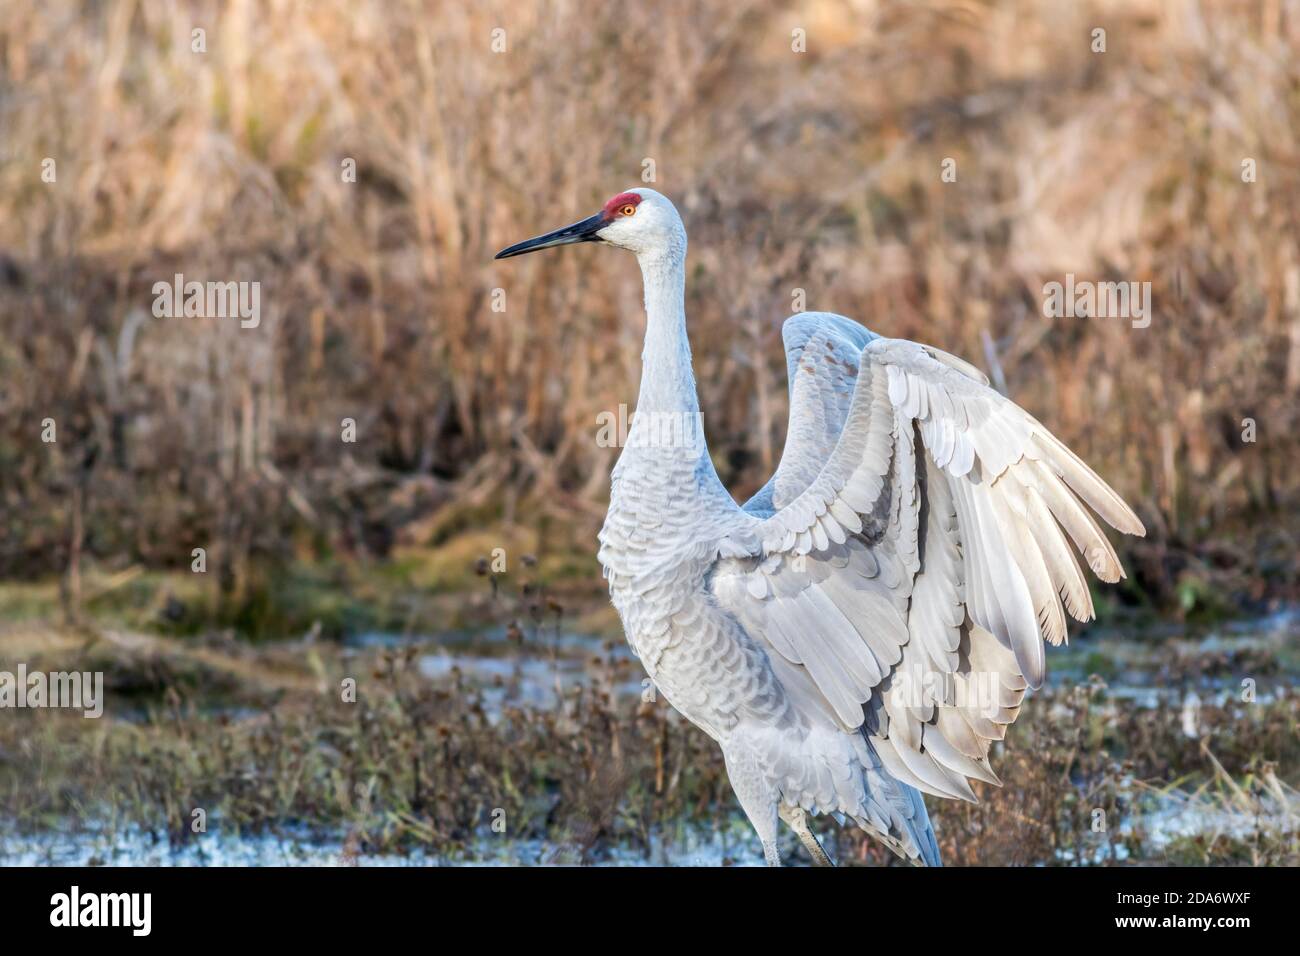 Sandhill Crane, Grus canadensis, displaying graceful wings surrounded by golden grasses in the marsh Stock Photo